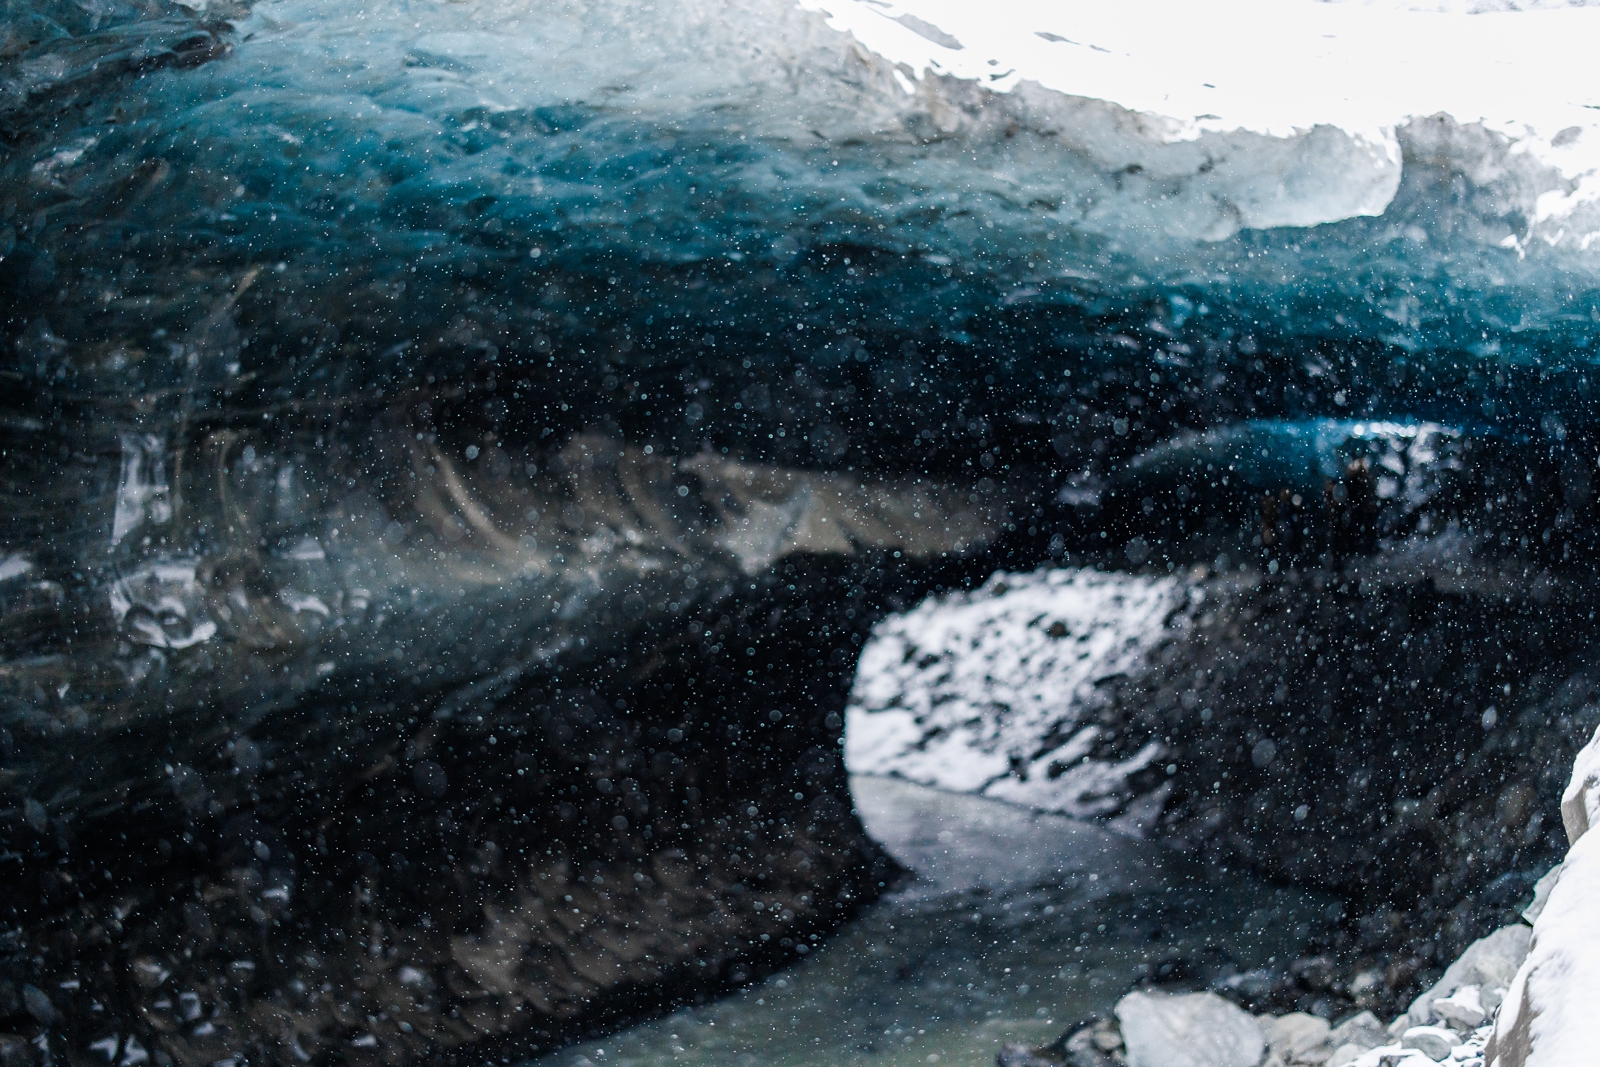 A snowy day at this Iceland ice cave - perfect for an adventurous elopement.